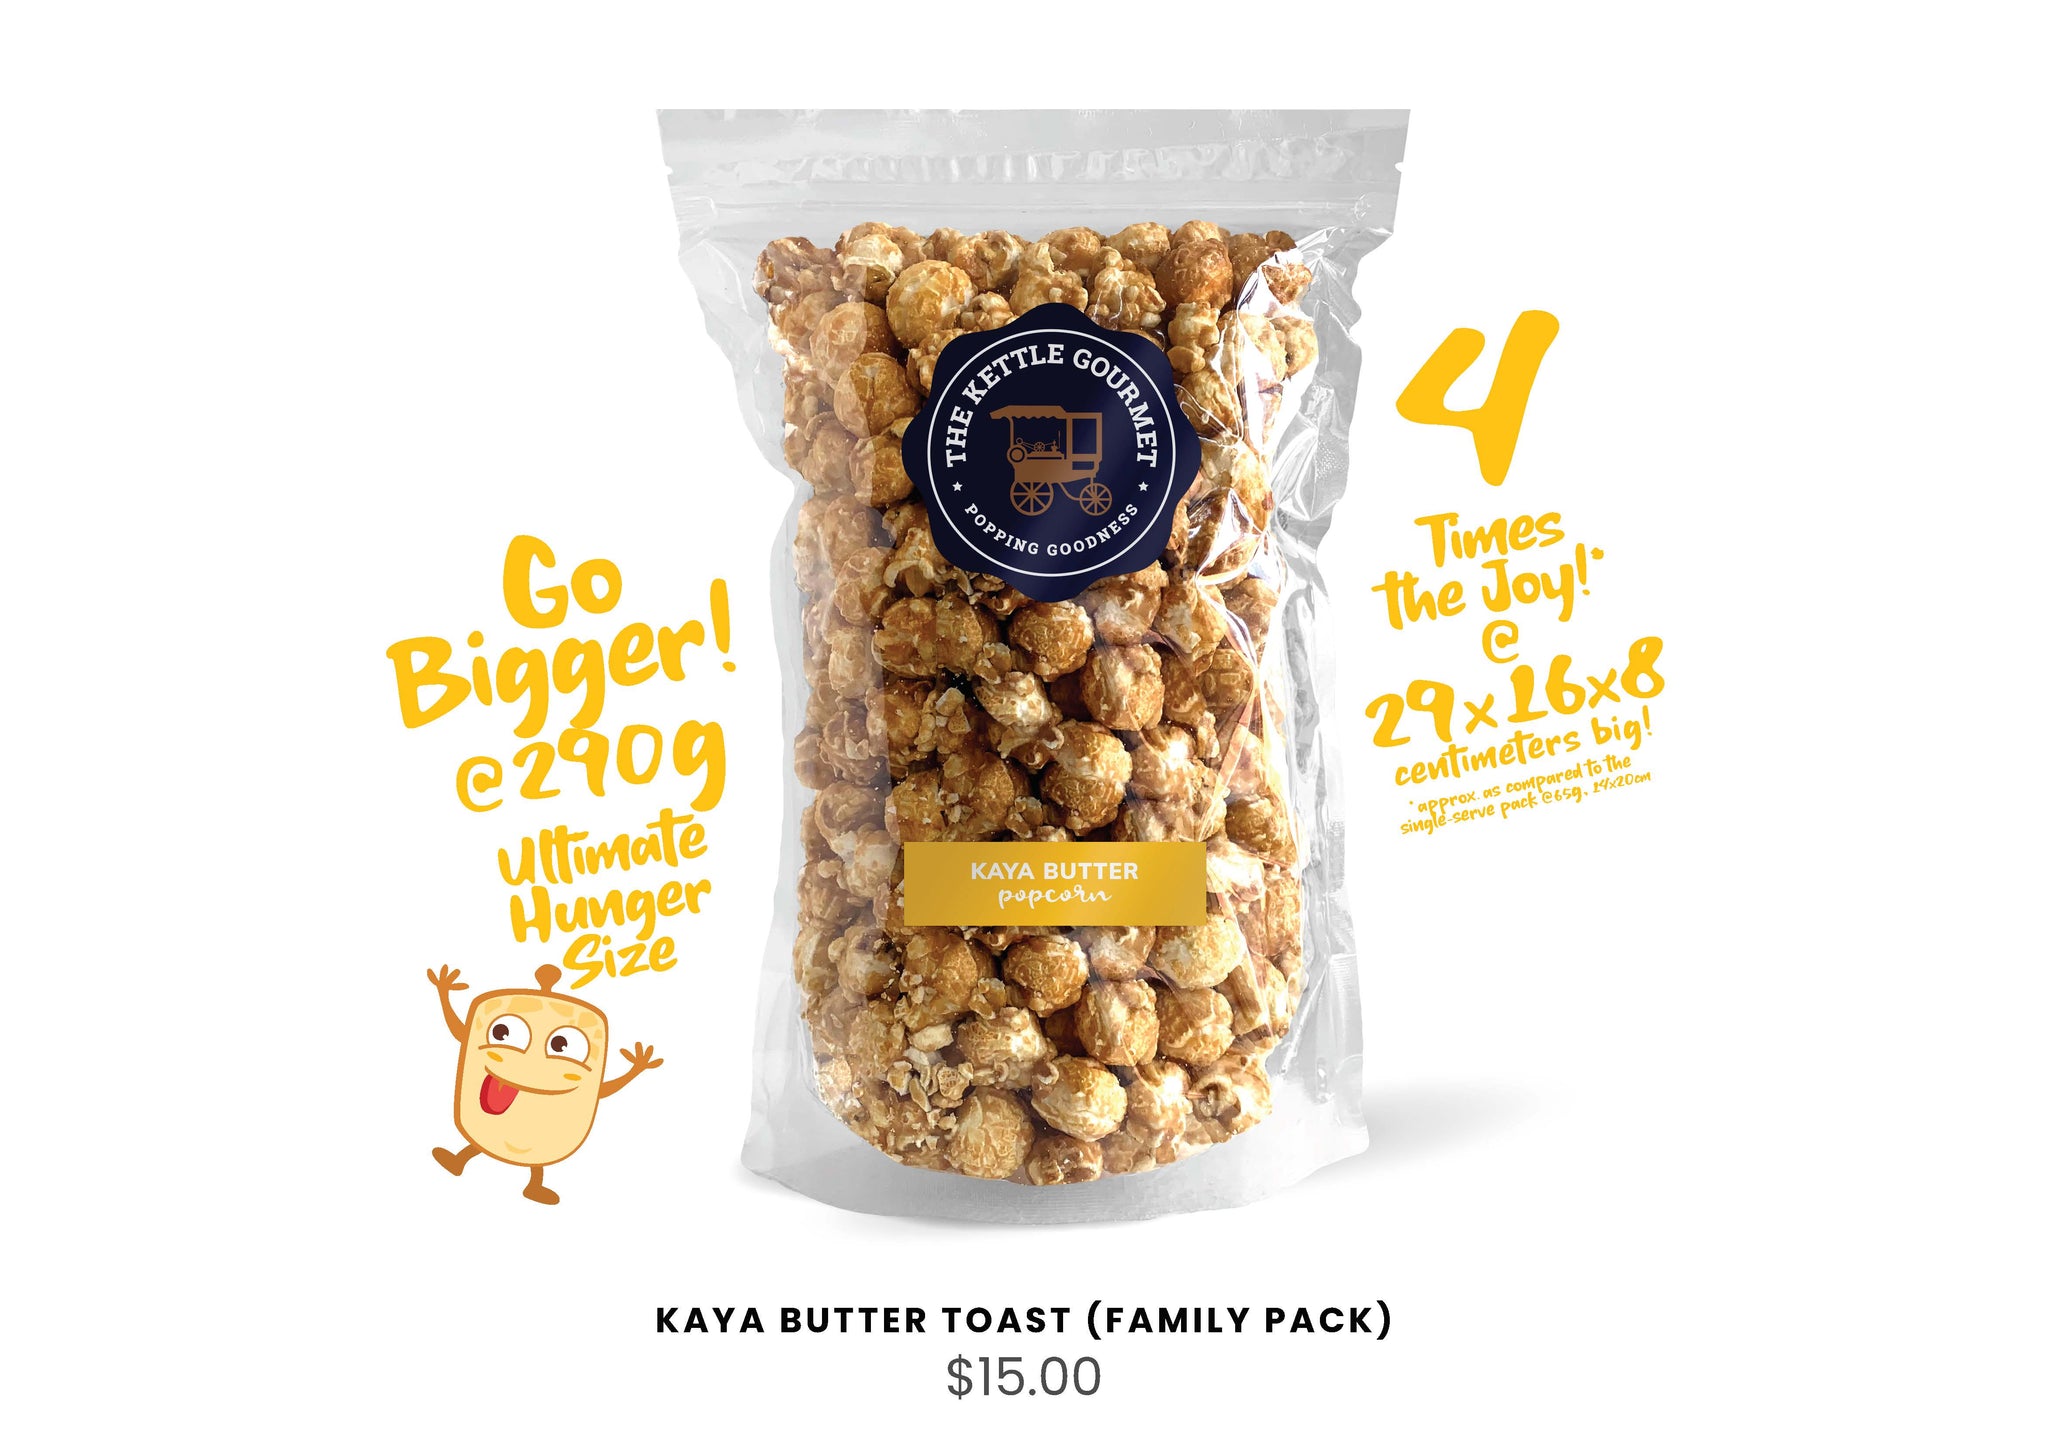 The Kettle Gourmet's Kaya Butter Toast Family Pack